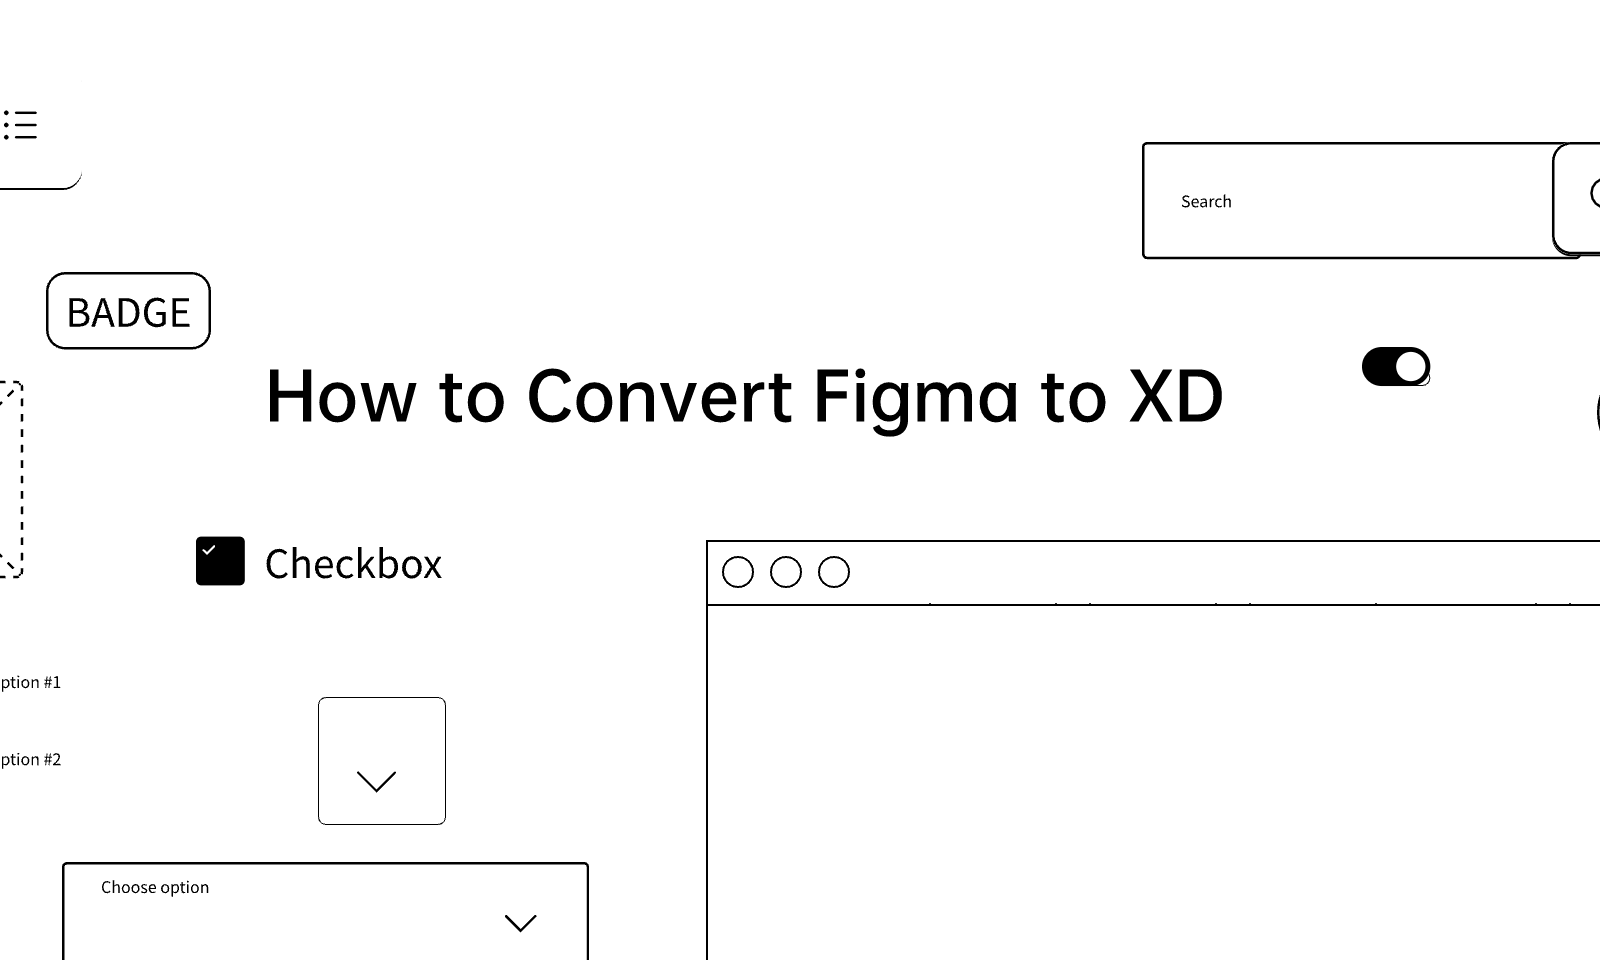  How to Convert Figma to XD